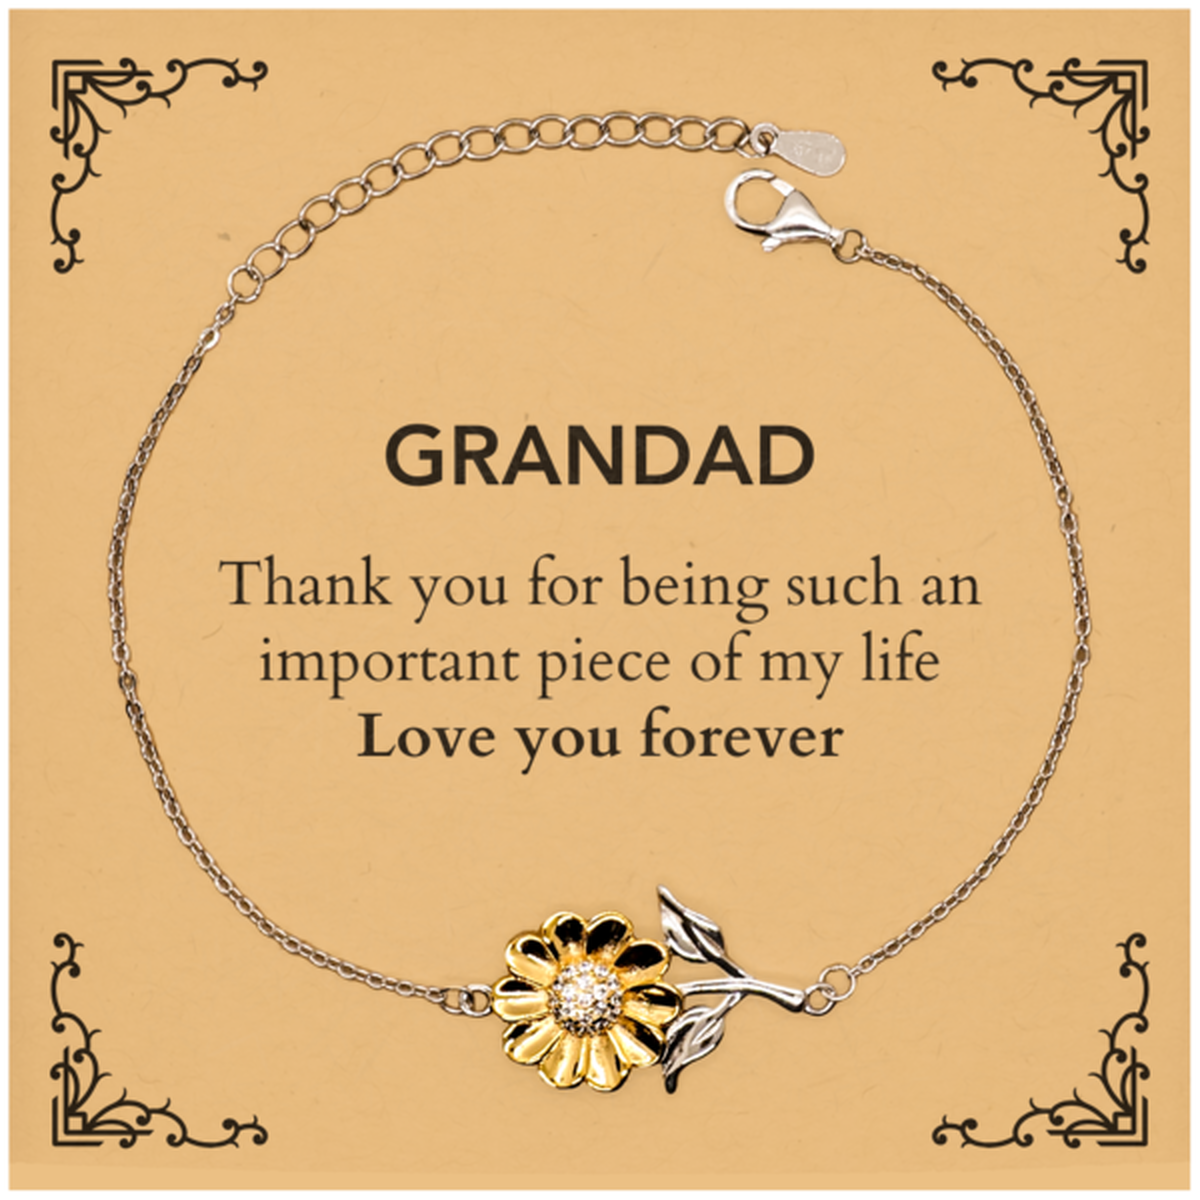 Appropriate Grandad Sunflower Bracelet Epic Birthday Gifts for Grandad Thank you for being such an important piece of my life Grandad Christmas Mothers Fathers Day